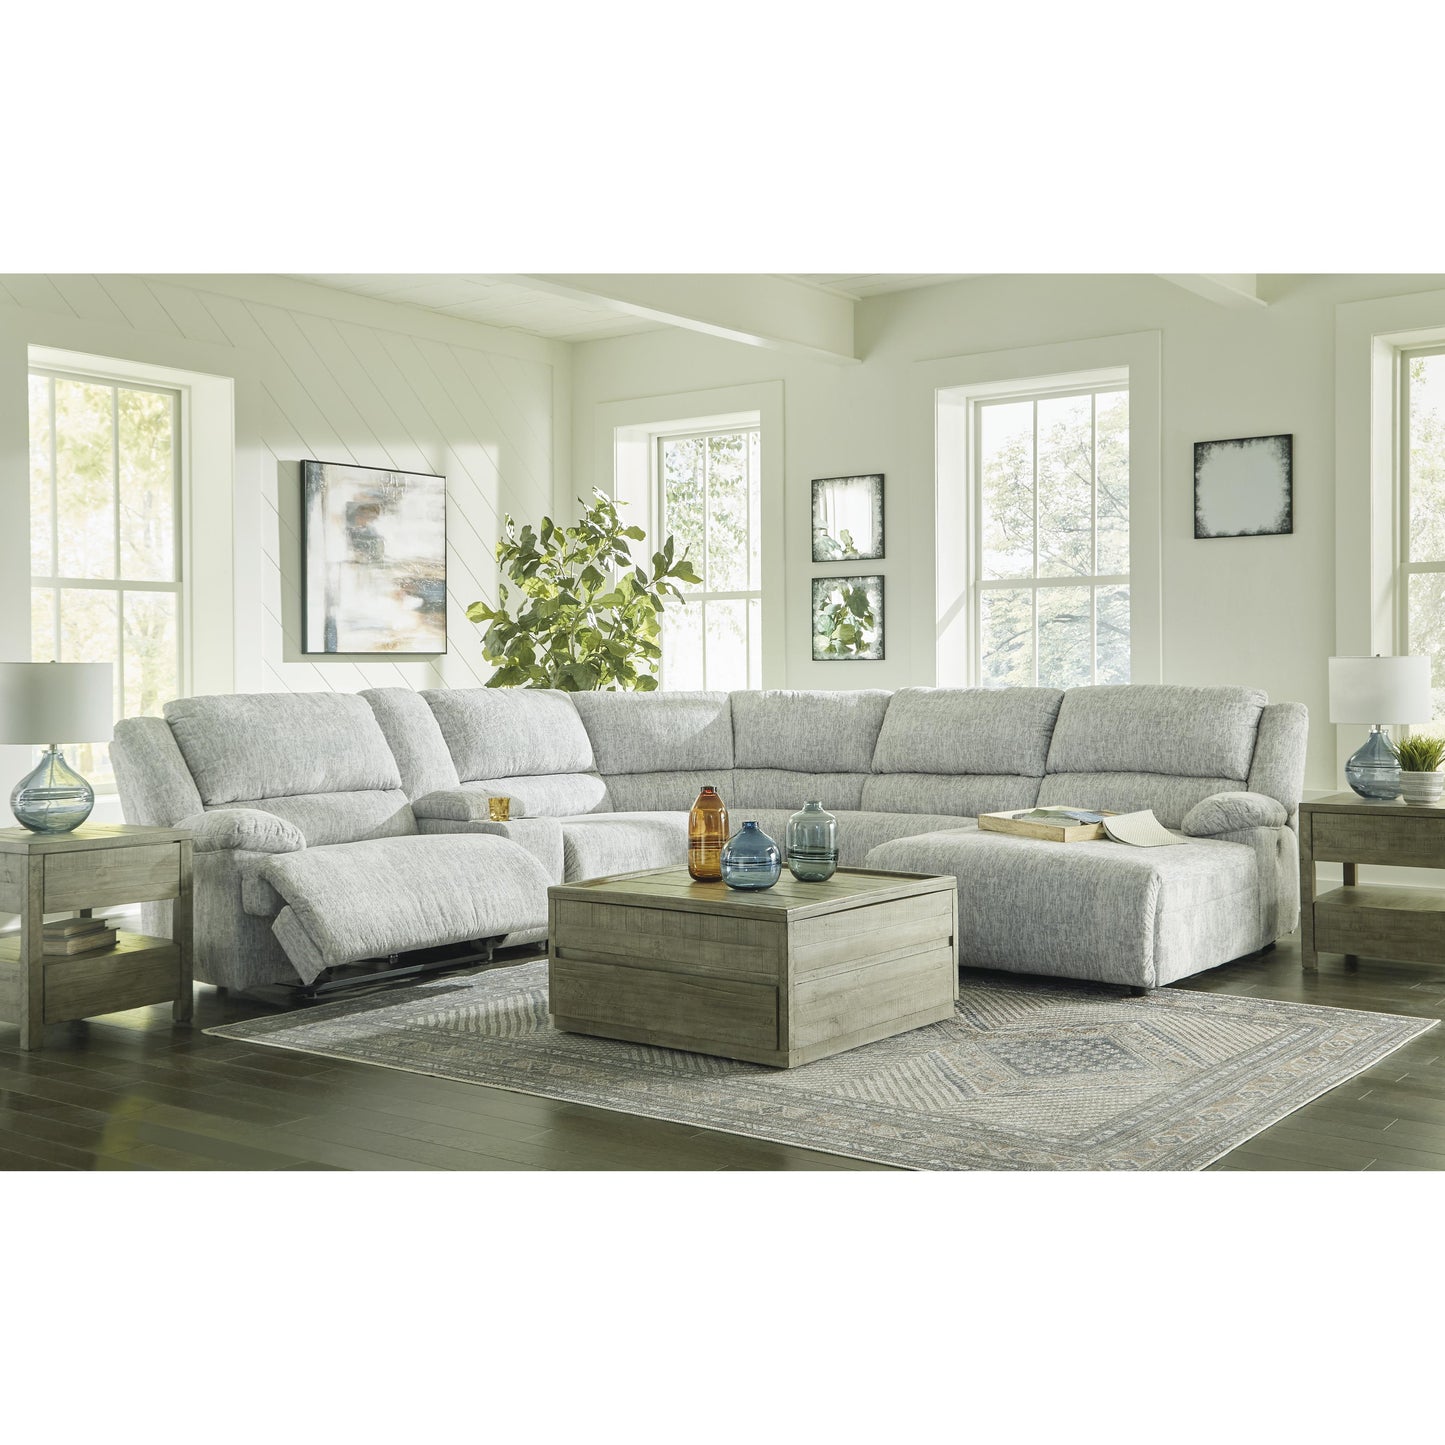 Signature Design by Ashley McClelland Power Reclining Fabric 6 pc Sectional 2930258/2930257/2930219/2930277/2930246/2930297 IMAGE 4